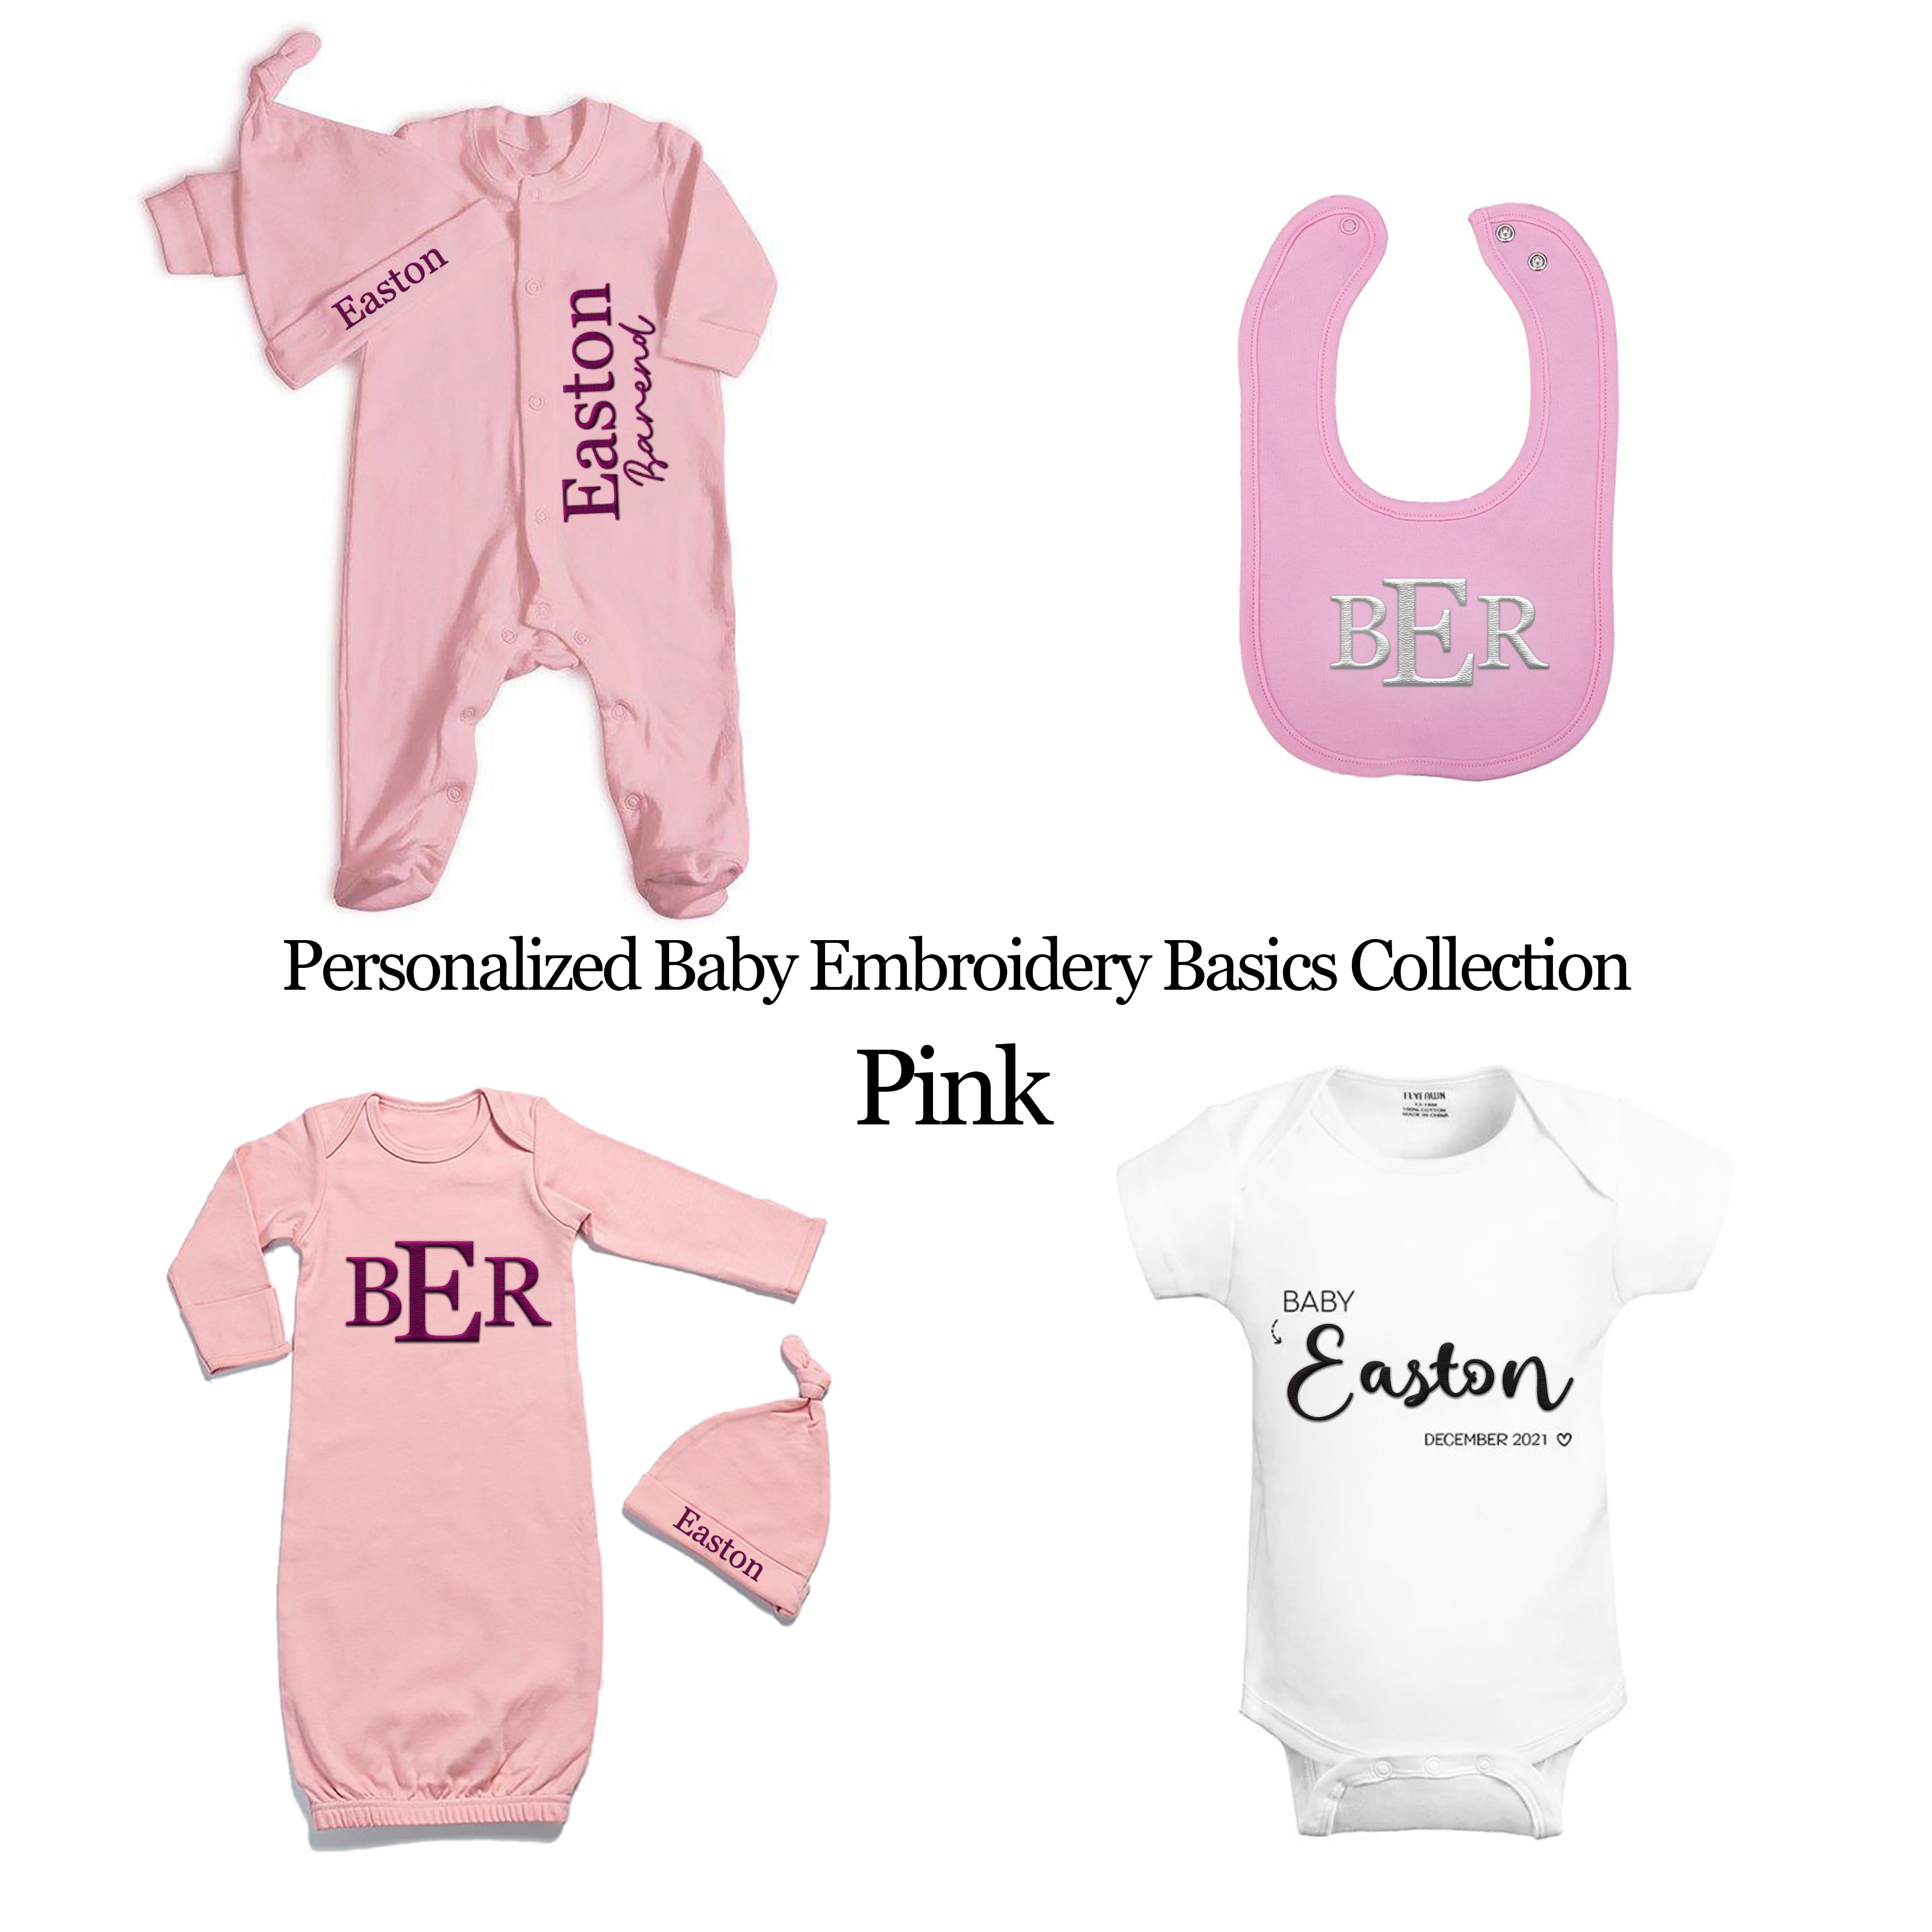 Personalized Baby Embroidery Basics Collection